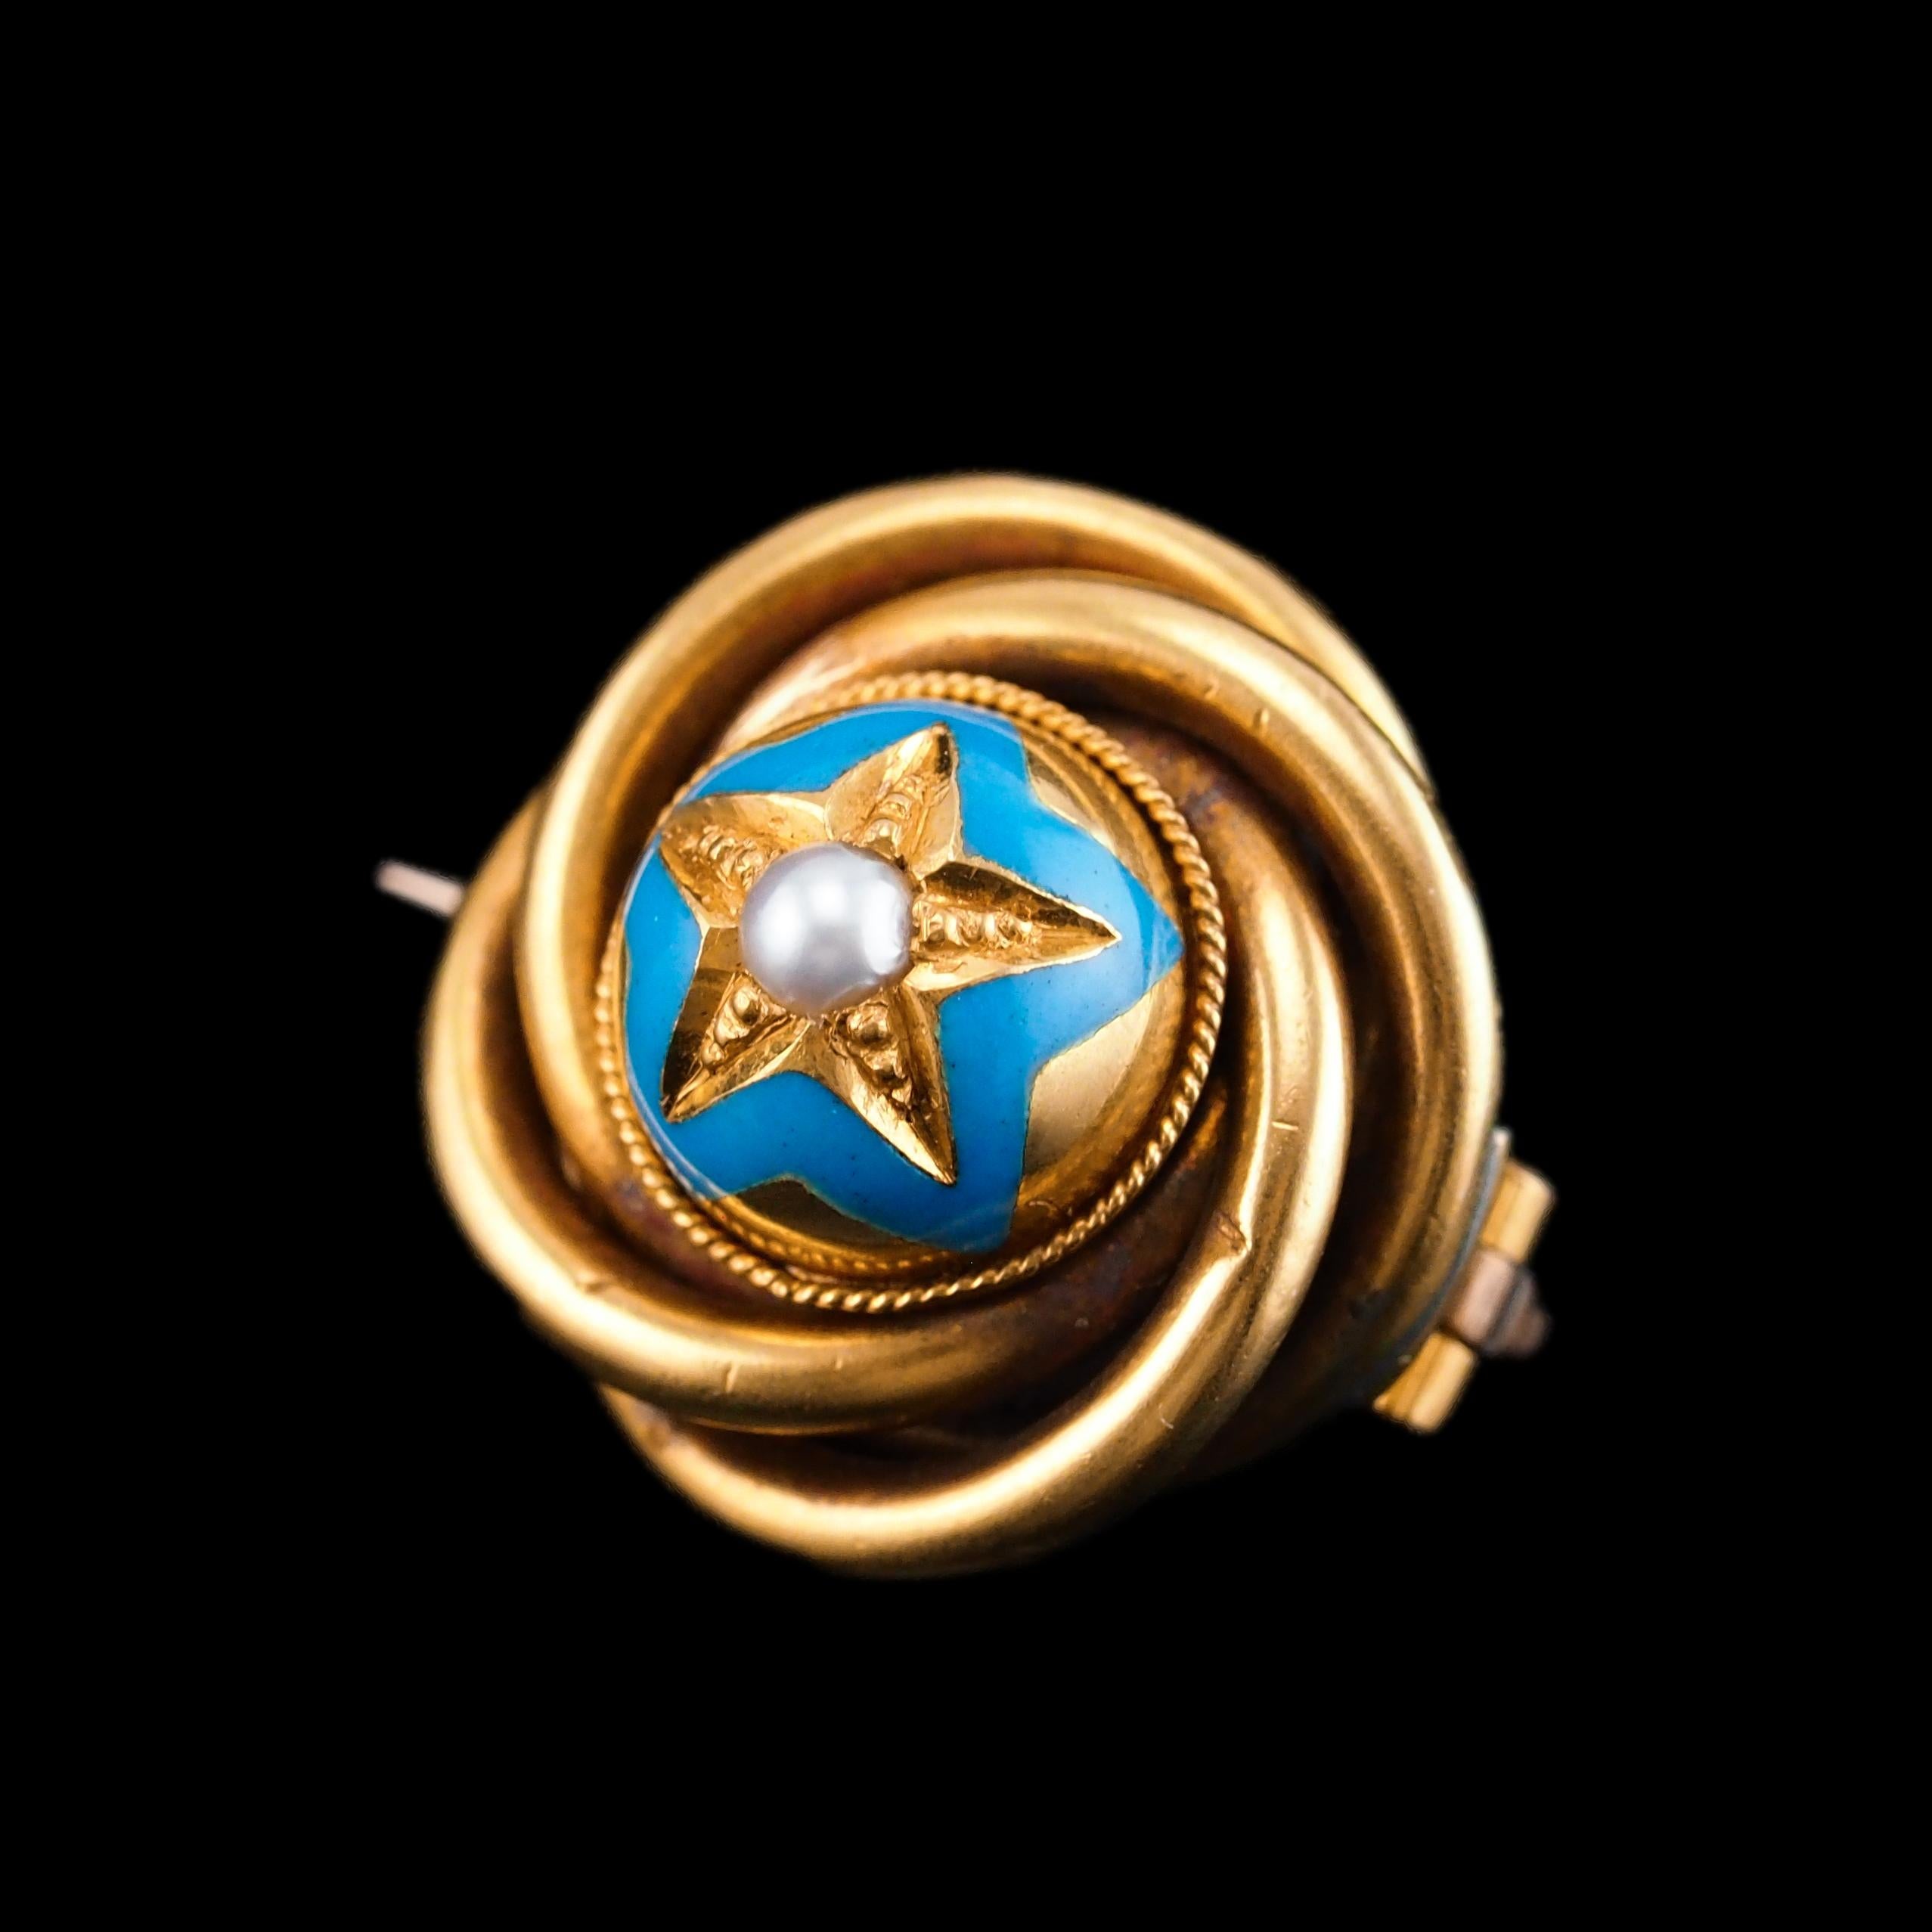 Antique Victorian 18K Gold Star Blue Enamel Pearl Brooch Pin - c.1880 For Sale 5